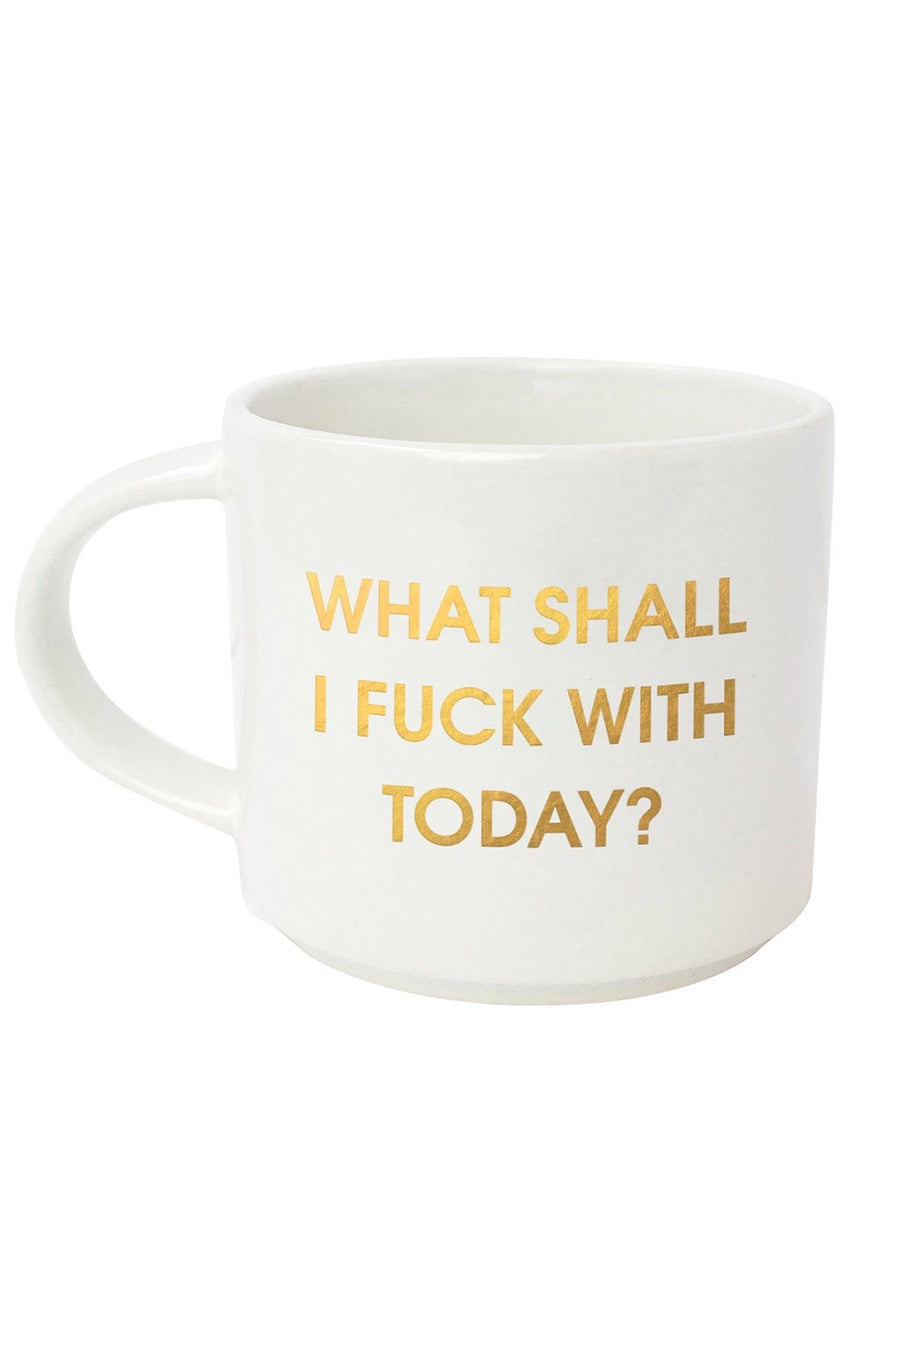 Fuck With Mug | White Gold - Main Image Number 1 of 1